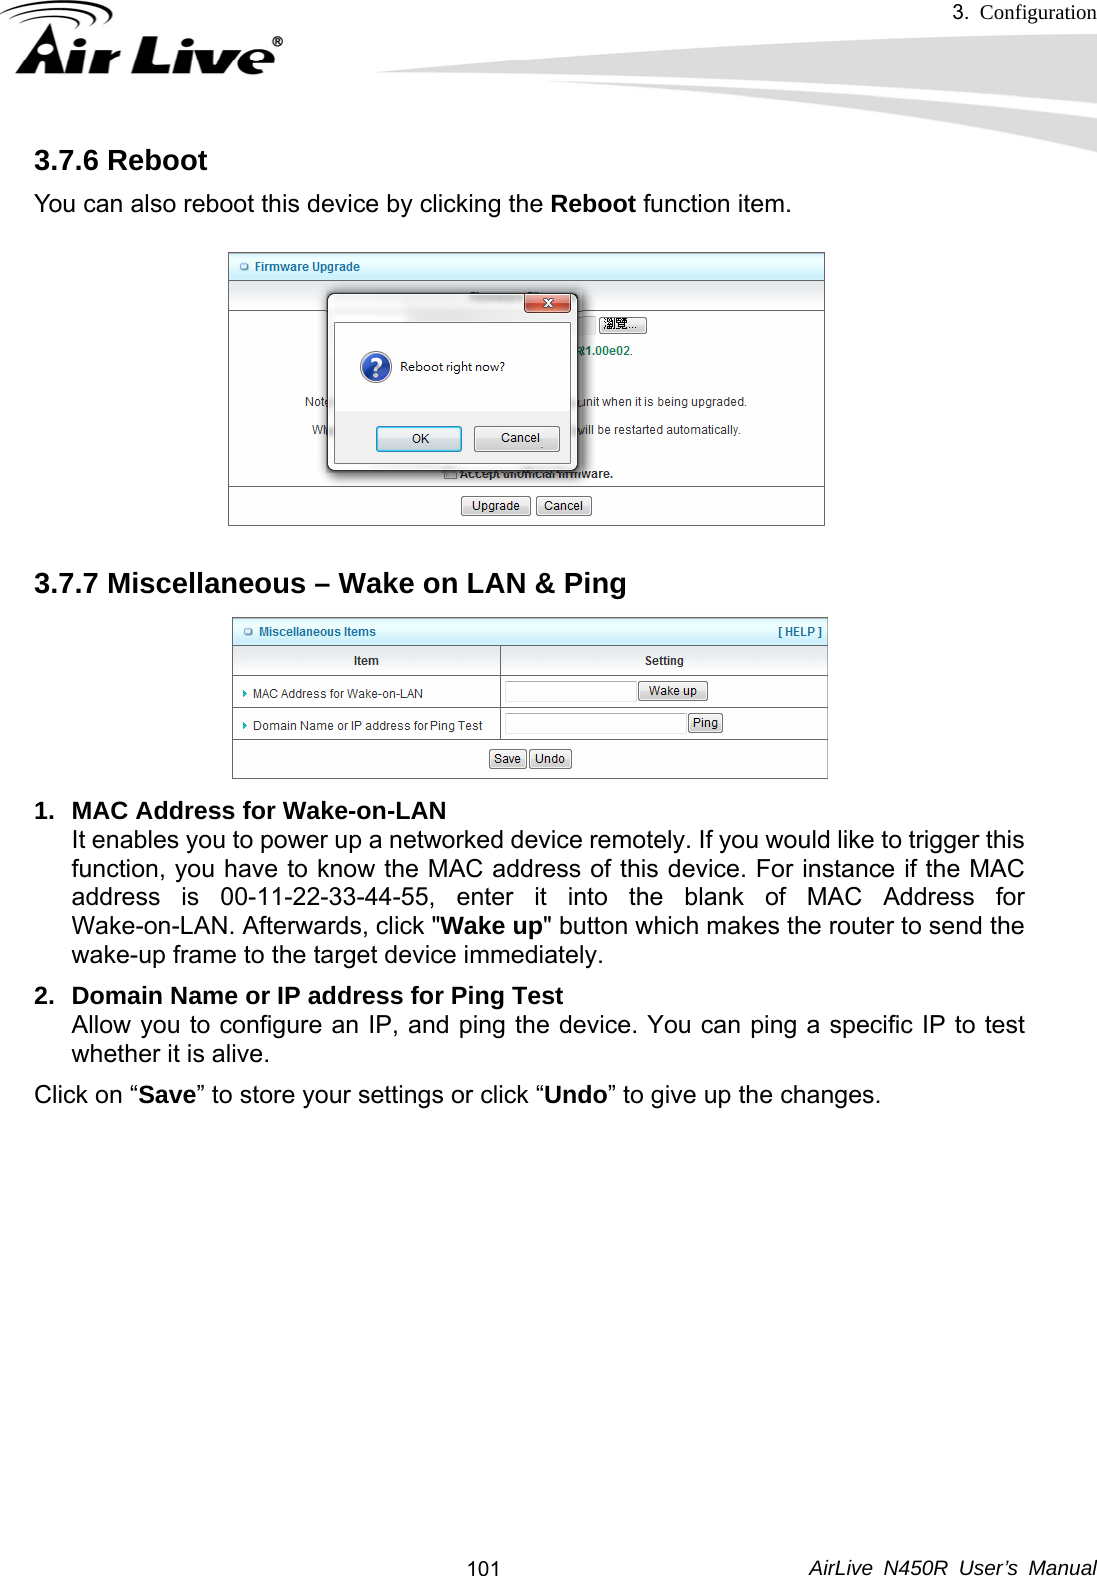 3.  Configuration     AirLive N450R User’s Manual  1013.7.6 Reboot You can also reboot this device by clicking the Reboot function item.   3.7.7 Miscellaneous – Wake on LAN &amp; Ping  1.  MAC Address for Wake-on-LAN It enables you to power up a networked device remotely. If you would like to trigger this function, you have to know the MAC address of this device. For instance if the MAC address is 00-11-22-33-44-55, enter it into the blank of MAC Address for Wake-on-LAN. Afterwards, click &quot;Wake up&quot; button which makes the router to send the wake-up frame to the target device immediately.   2.  Domain Name or IP address for Ping Test Allow you to configure an IP, and ping the device. You can ping a specific IP to test whether it is alive. Click on “Save” to store your settings or click “Undo” to give up the changes.     